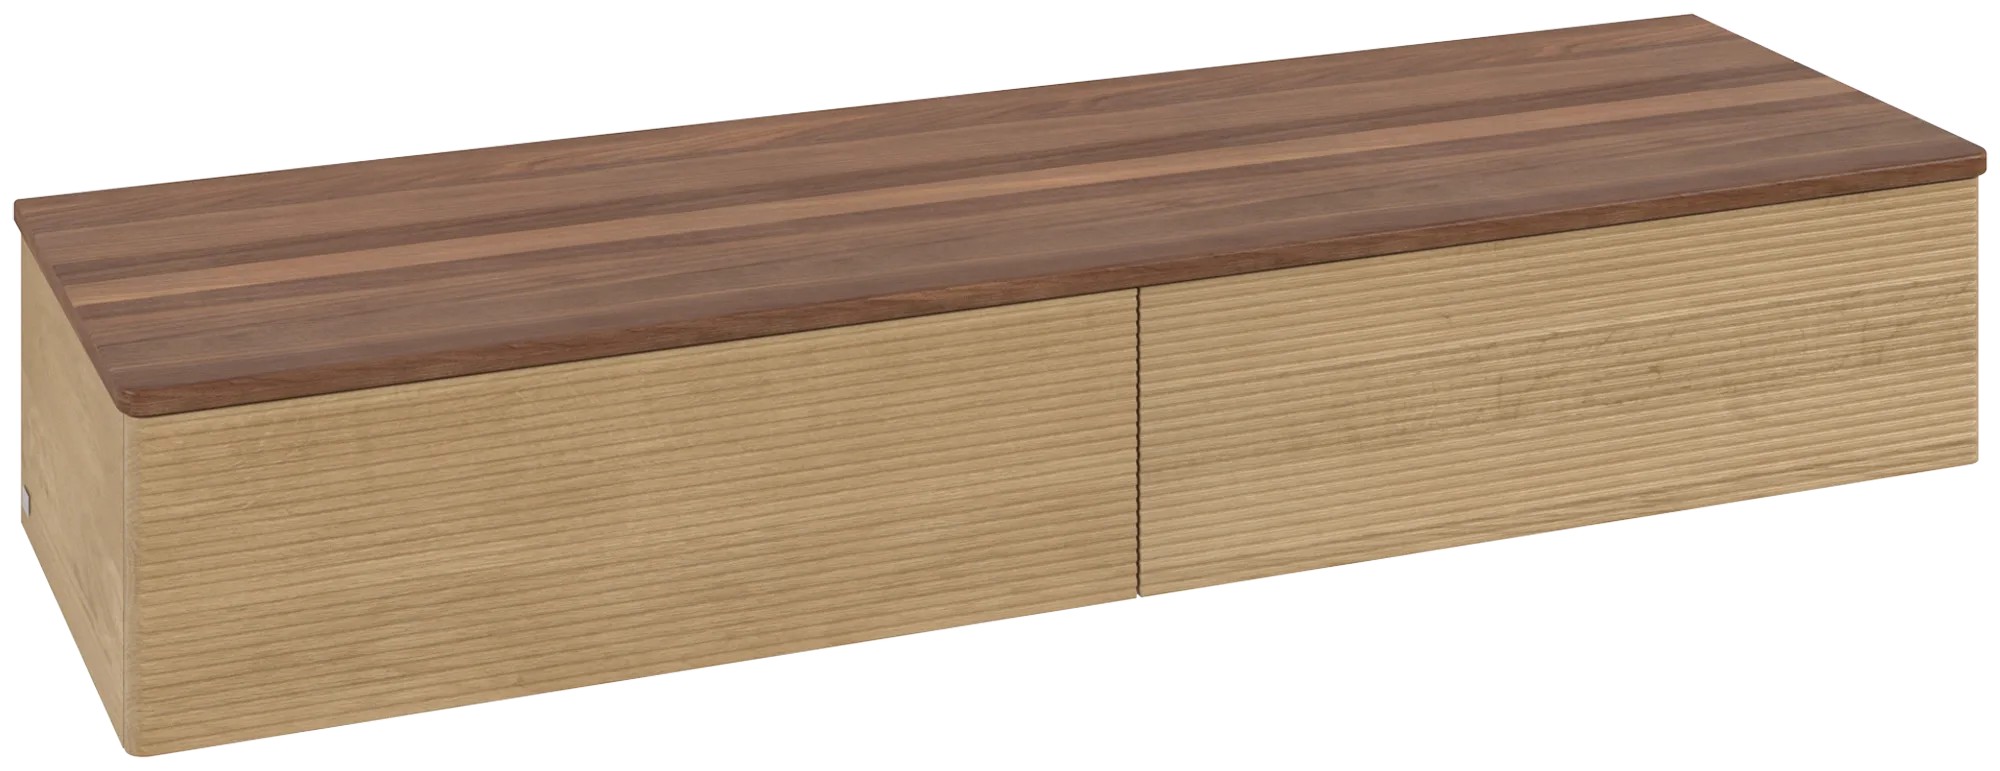 Picture of VILLEROY BOCH Antao Sideboard, with lighting, 2 pull-out compartments, 1600 x 268 x 500 mm, Front with grain texture, Honey Oak / Warm Walnut #L42102HN